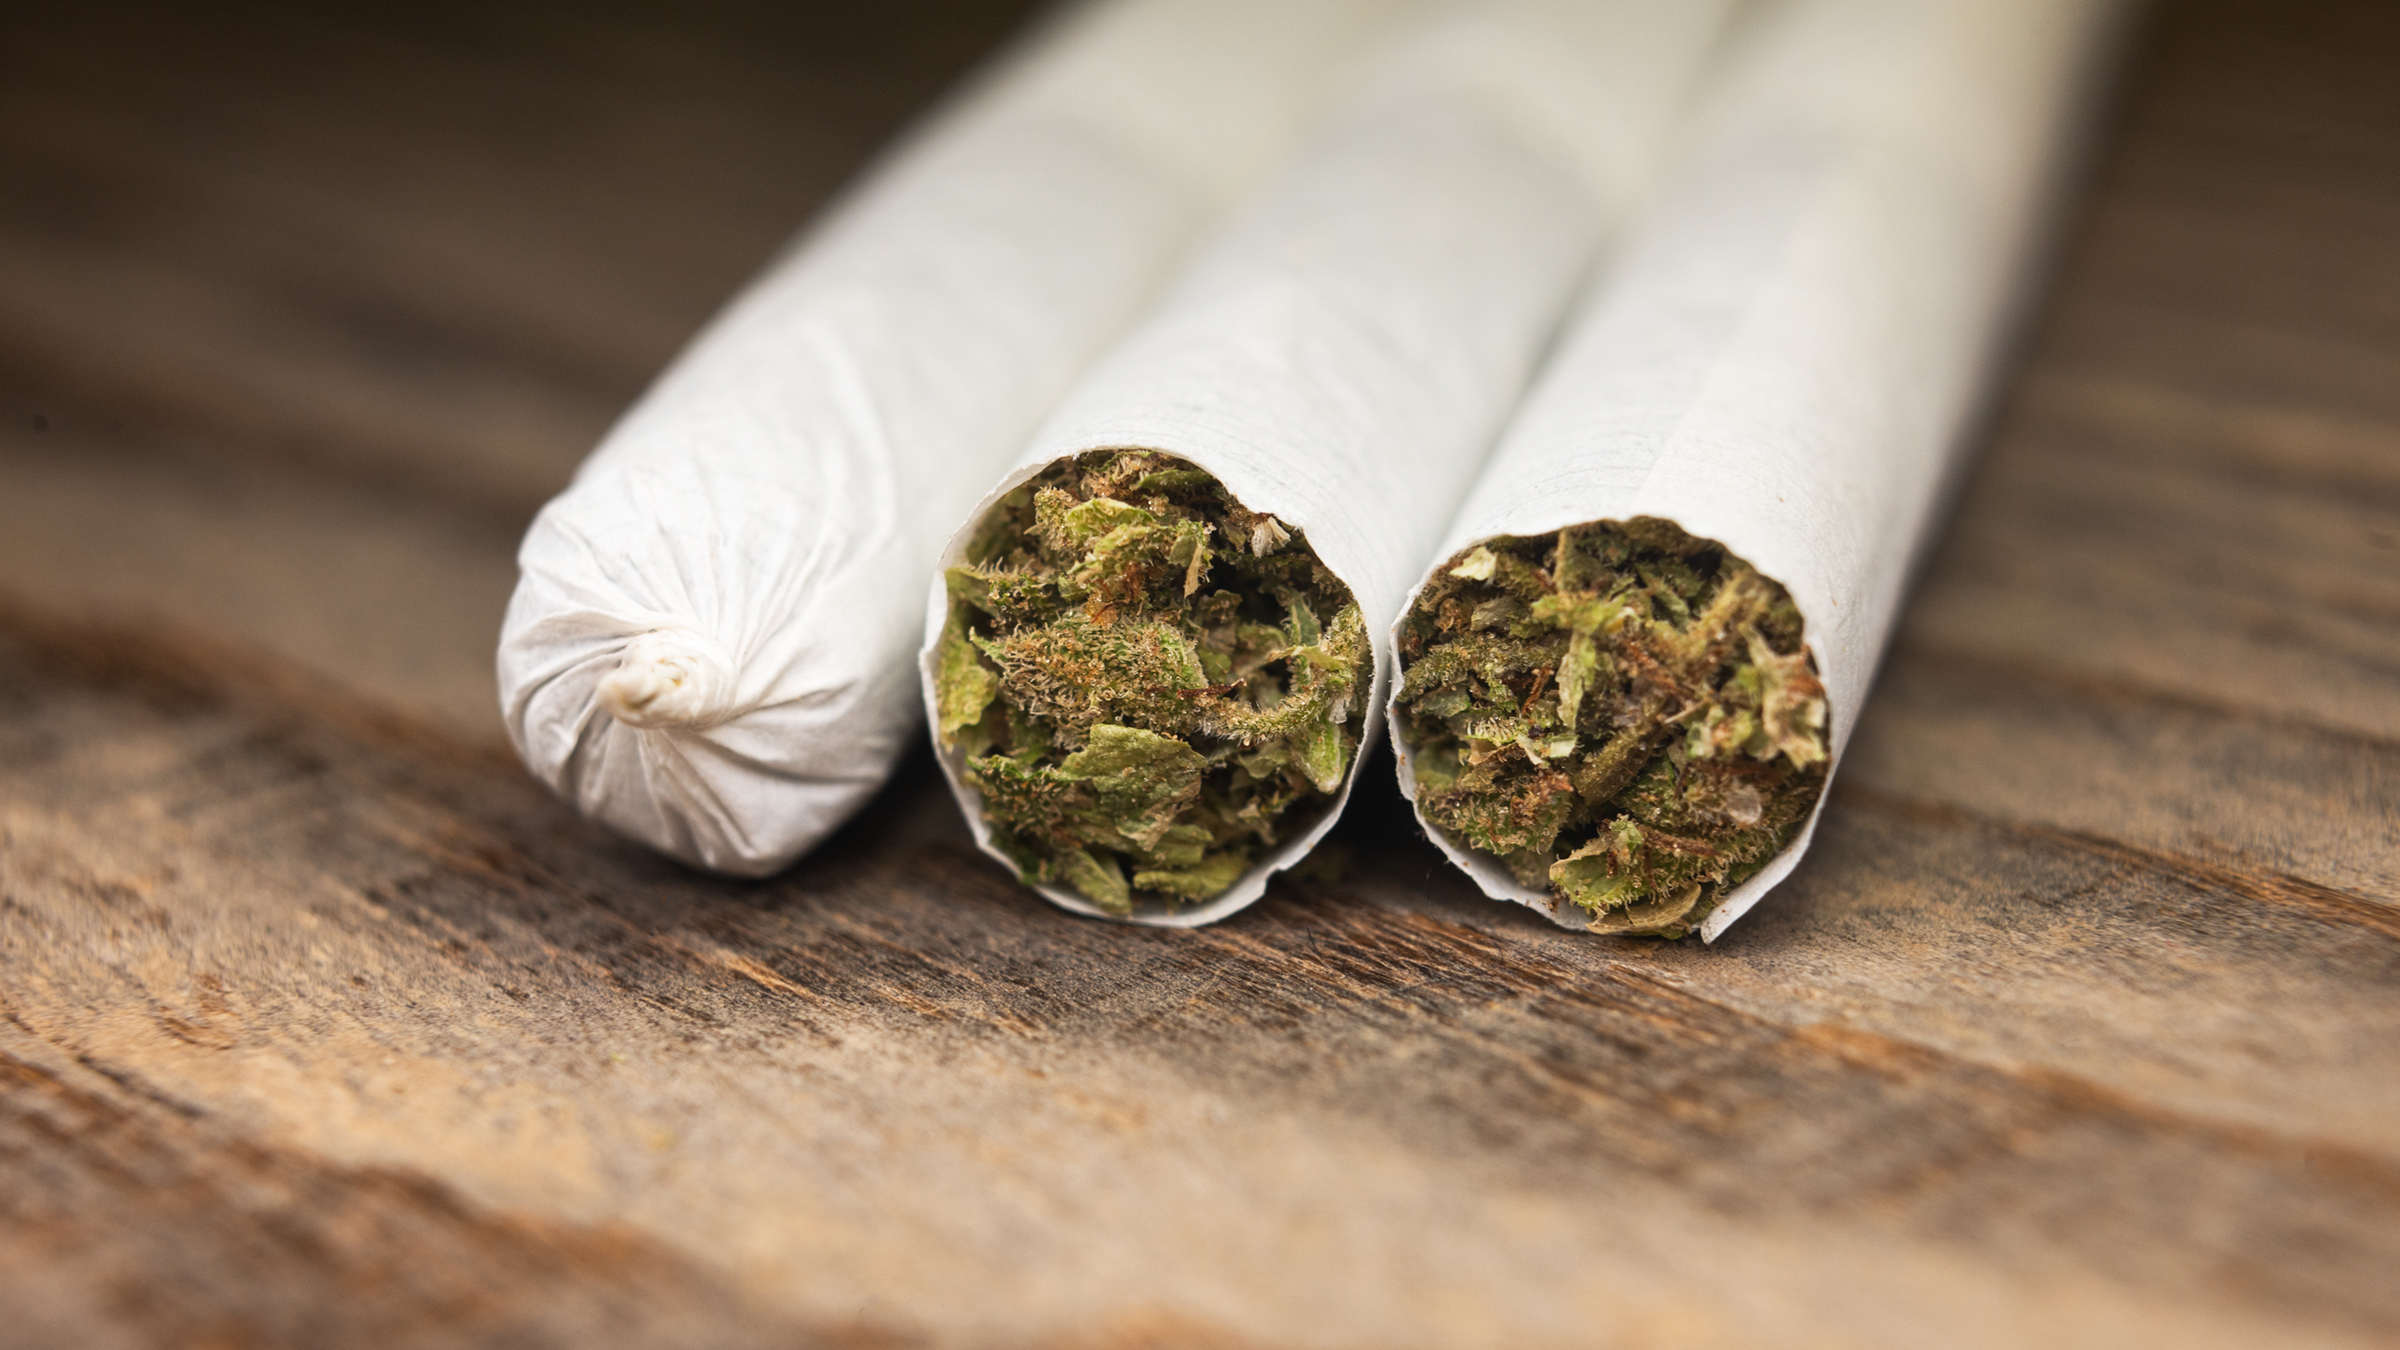 Secondhand marijuana smoke: What are the risks to your health